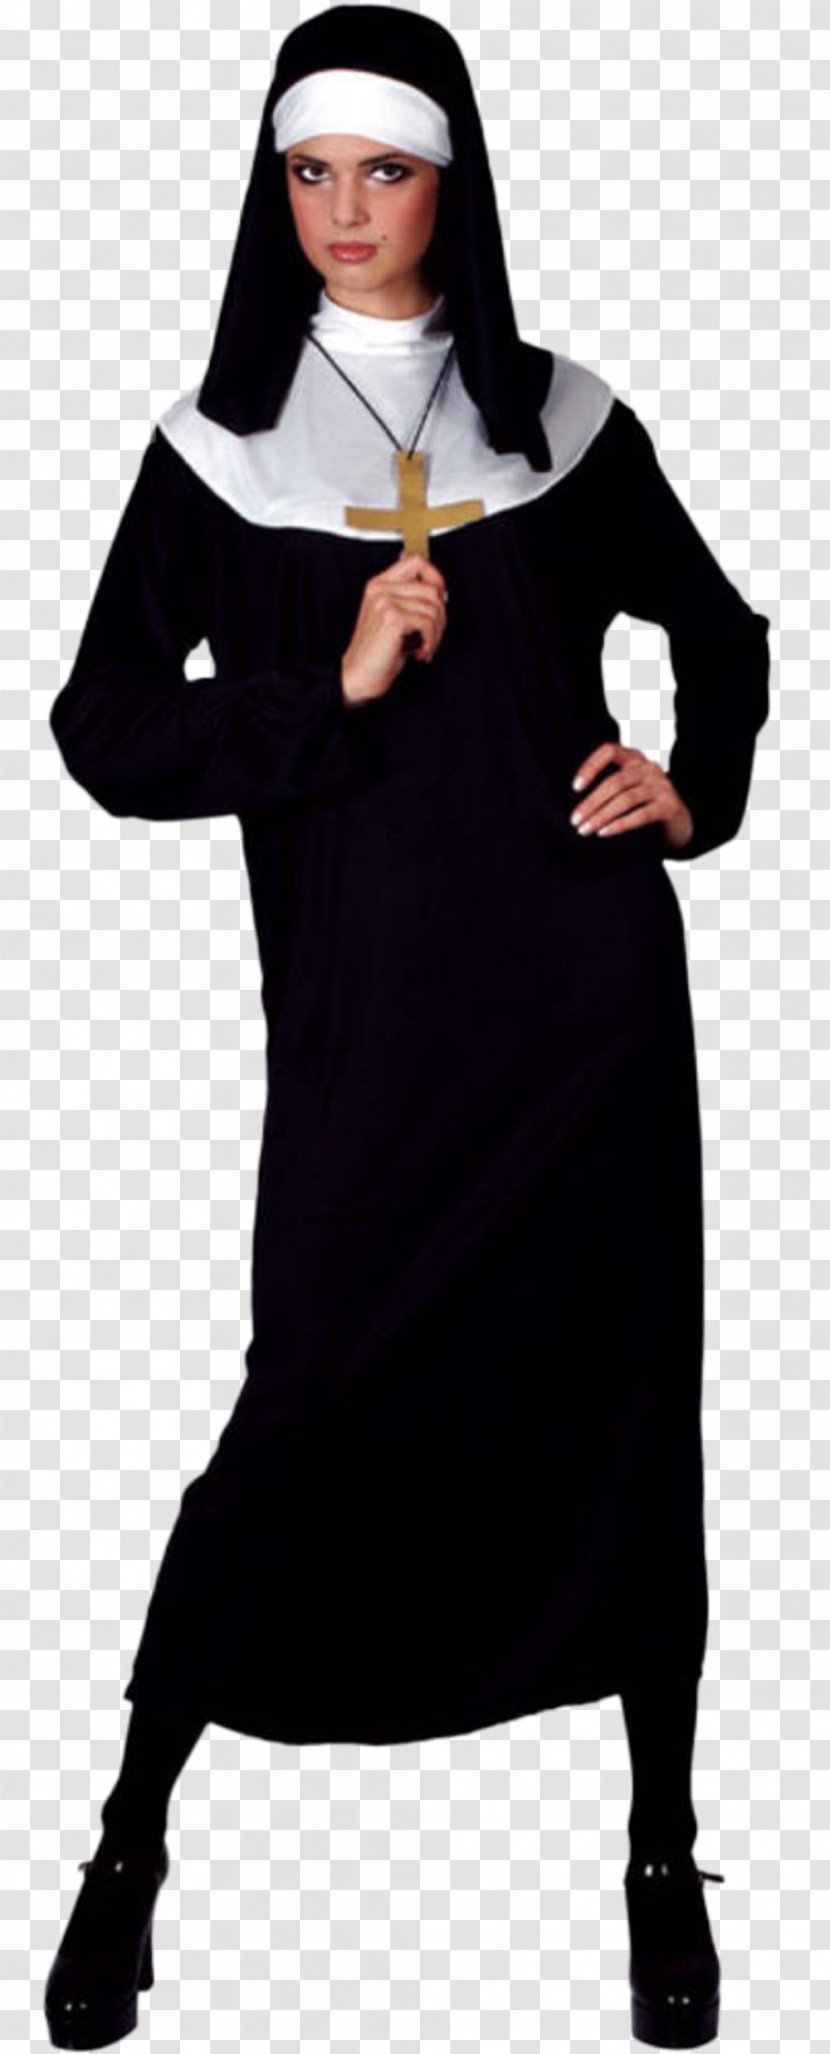 Costume Party Mother Superior Nun Clothing - Outerwear - Fancy Dress Transparent PNG